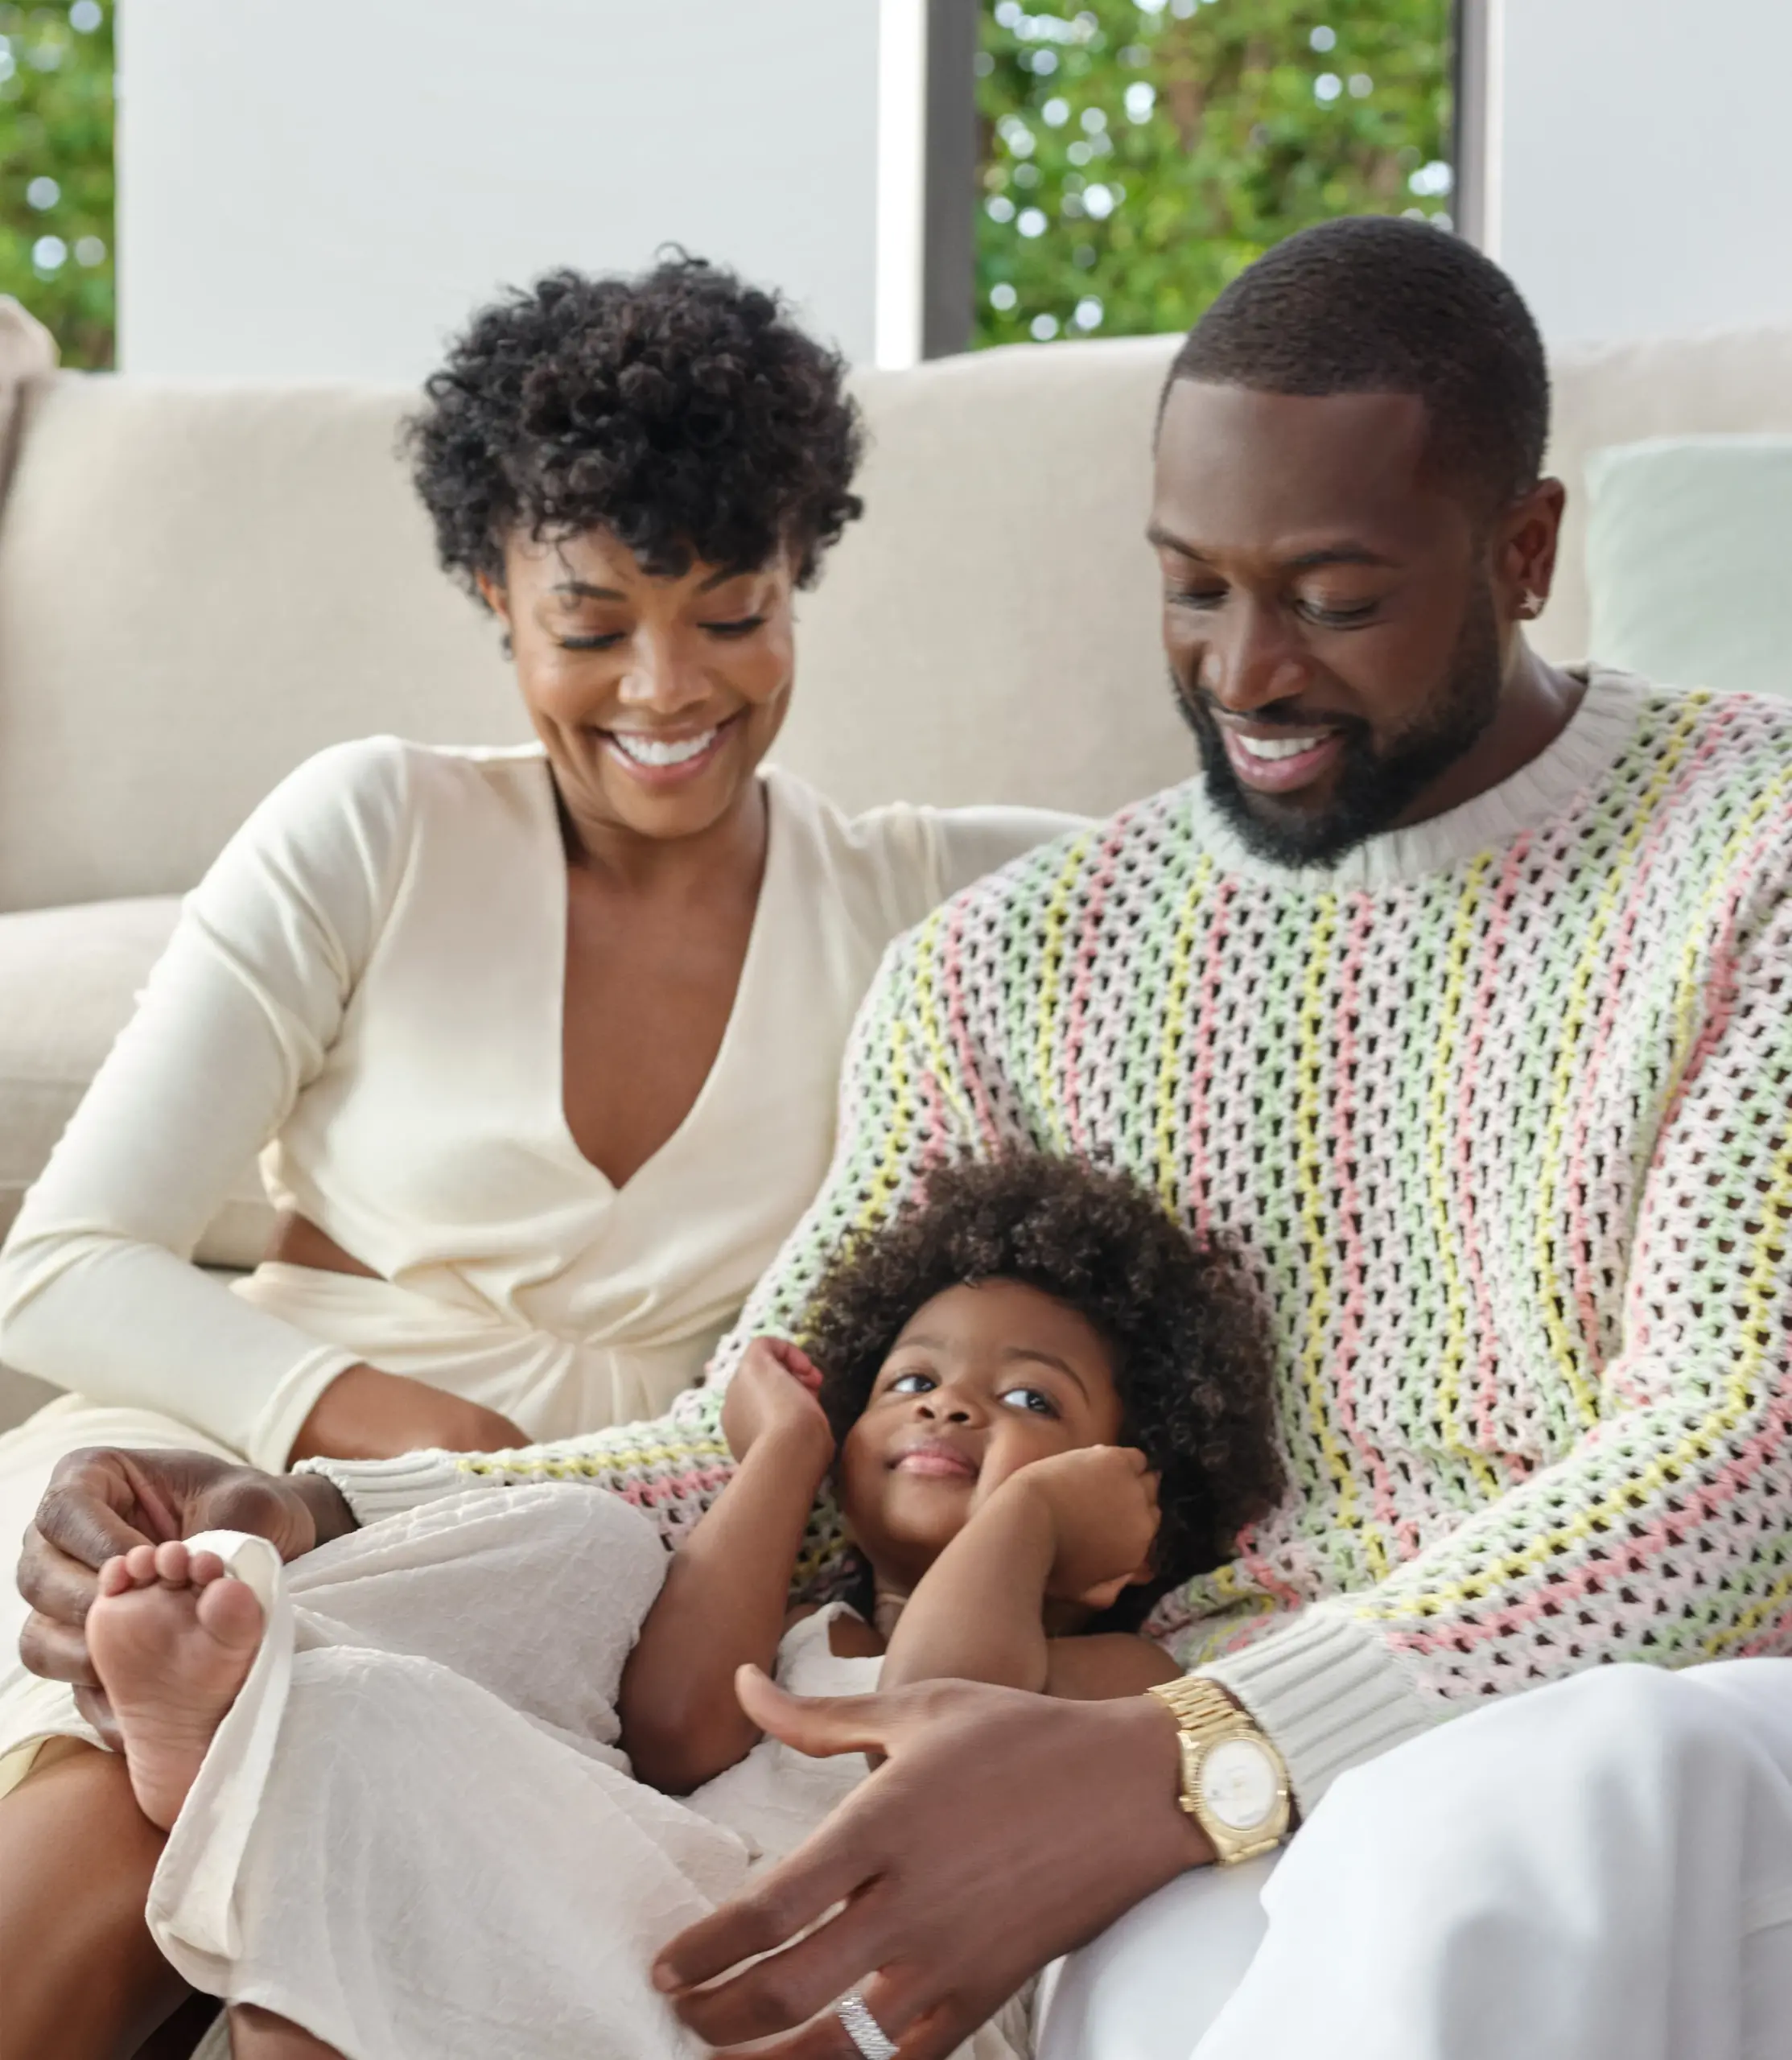 Gabrielle Union & Dwayne Wade’s Baby Brand PROUDLY is Made for Black and Brown Babies